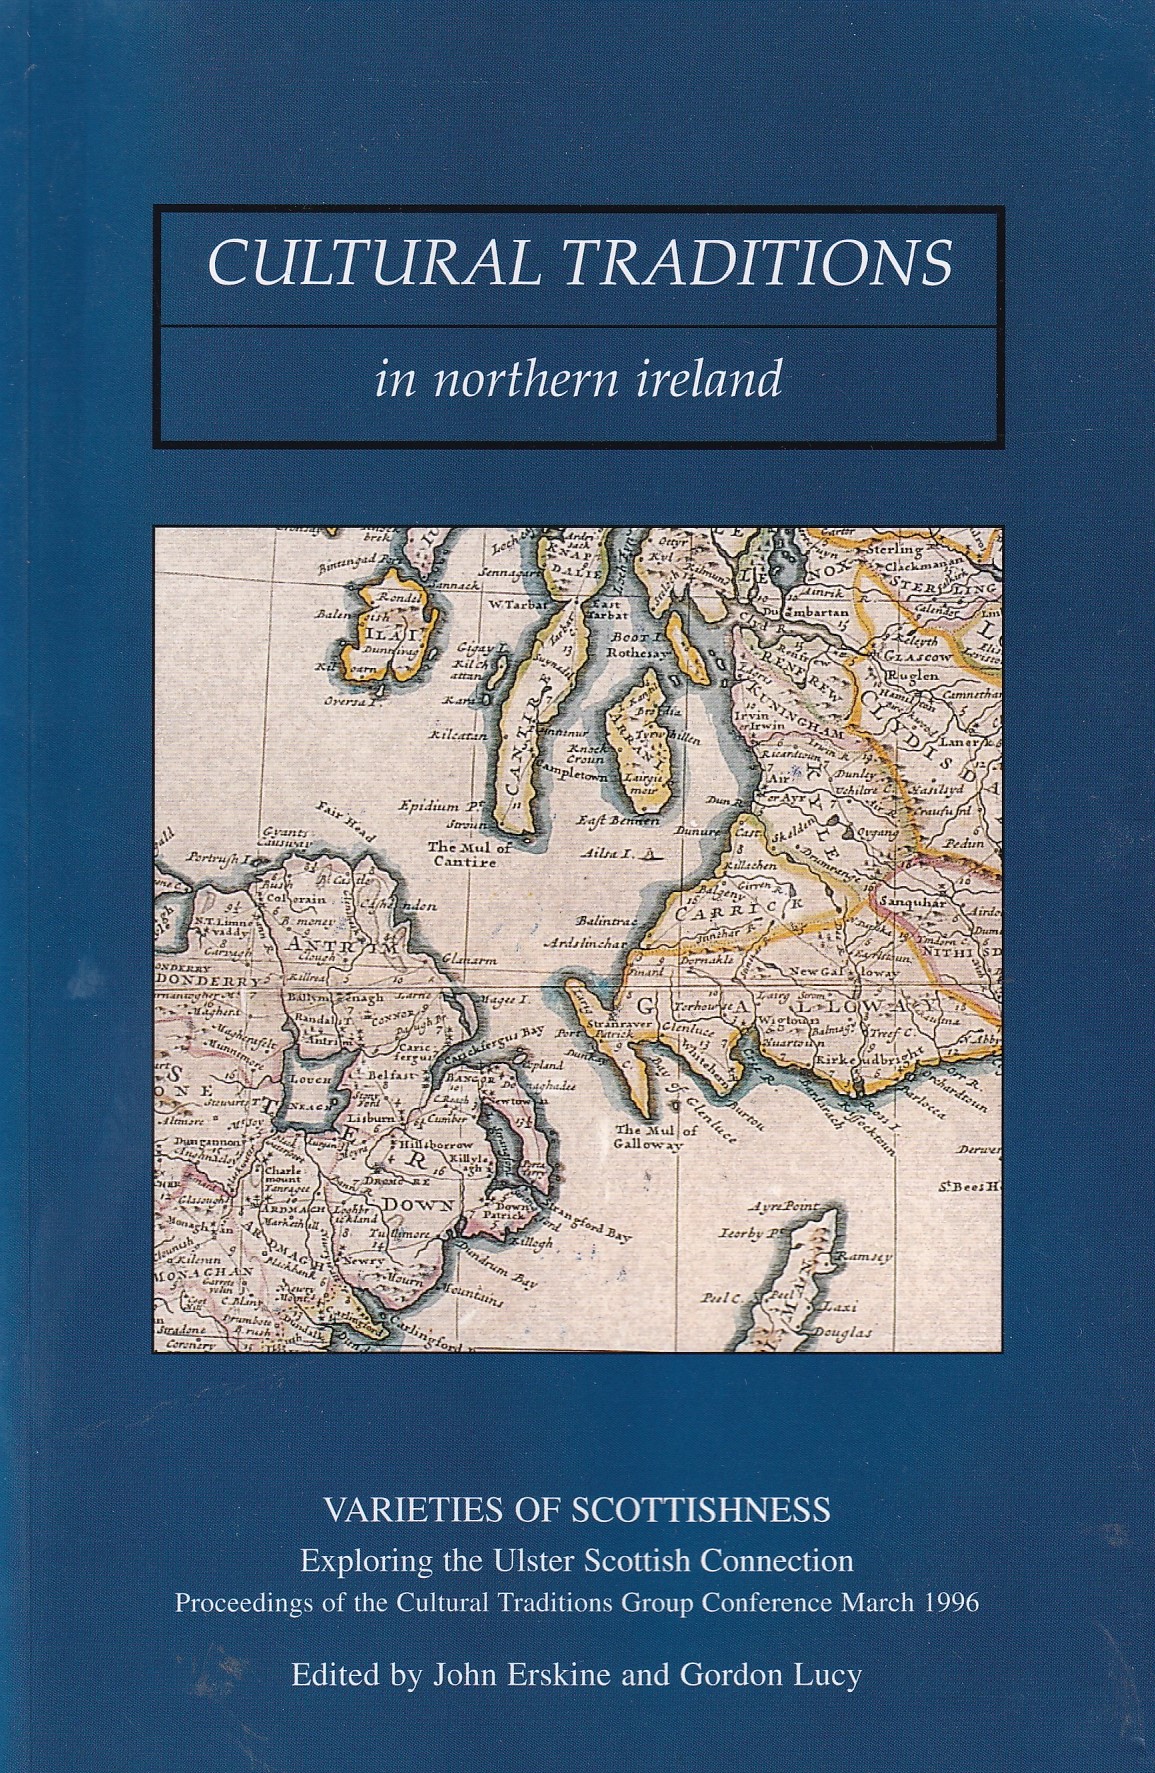 Varieties of Scottishness: Exploring the Ulster-Scottishness Connection (Cultural Traditions in Northern Ireland) by John Erskine